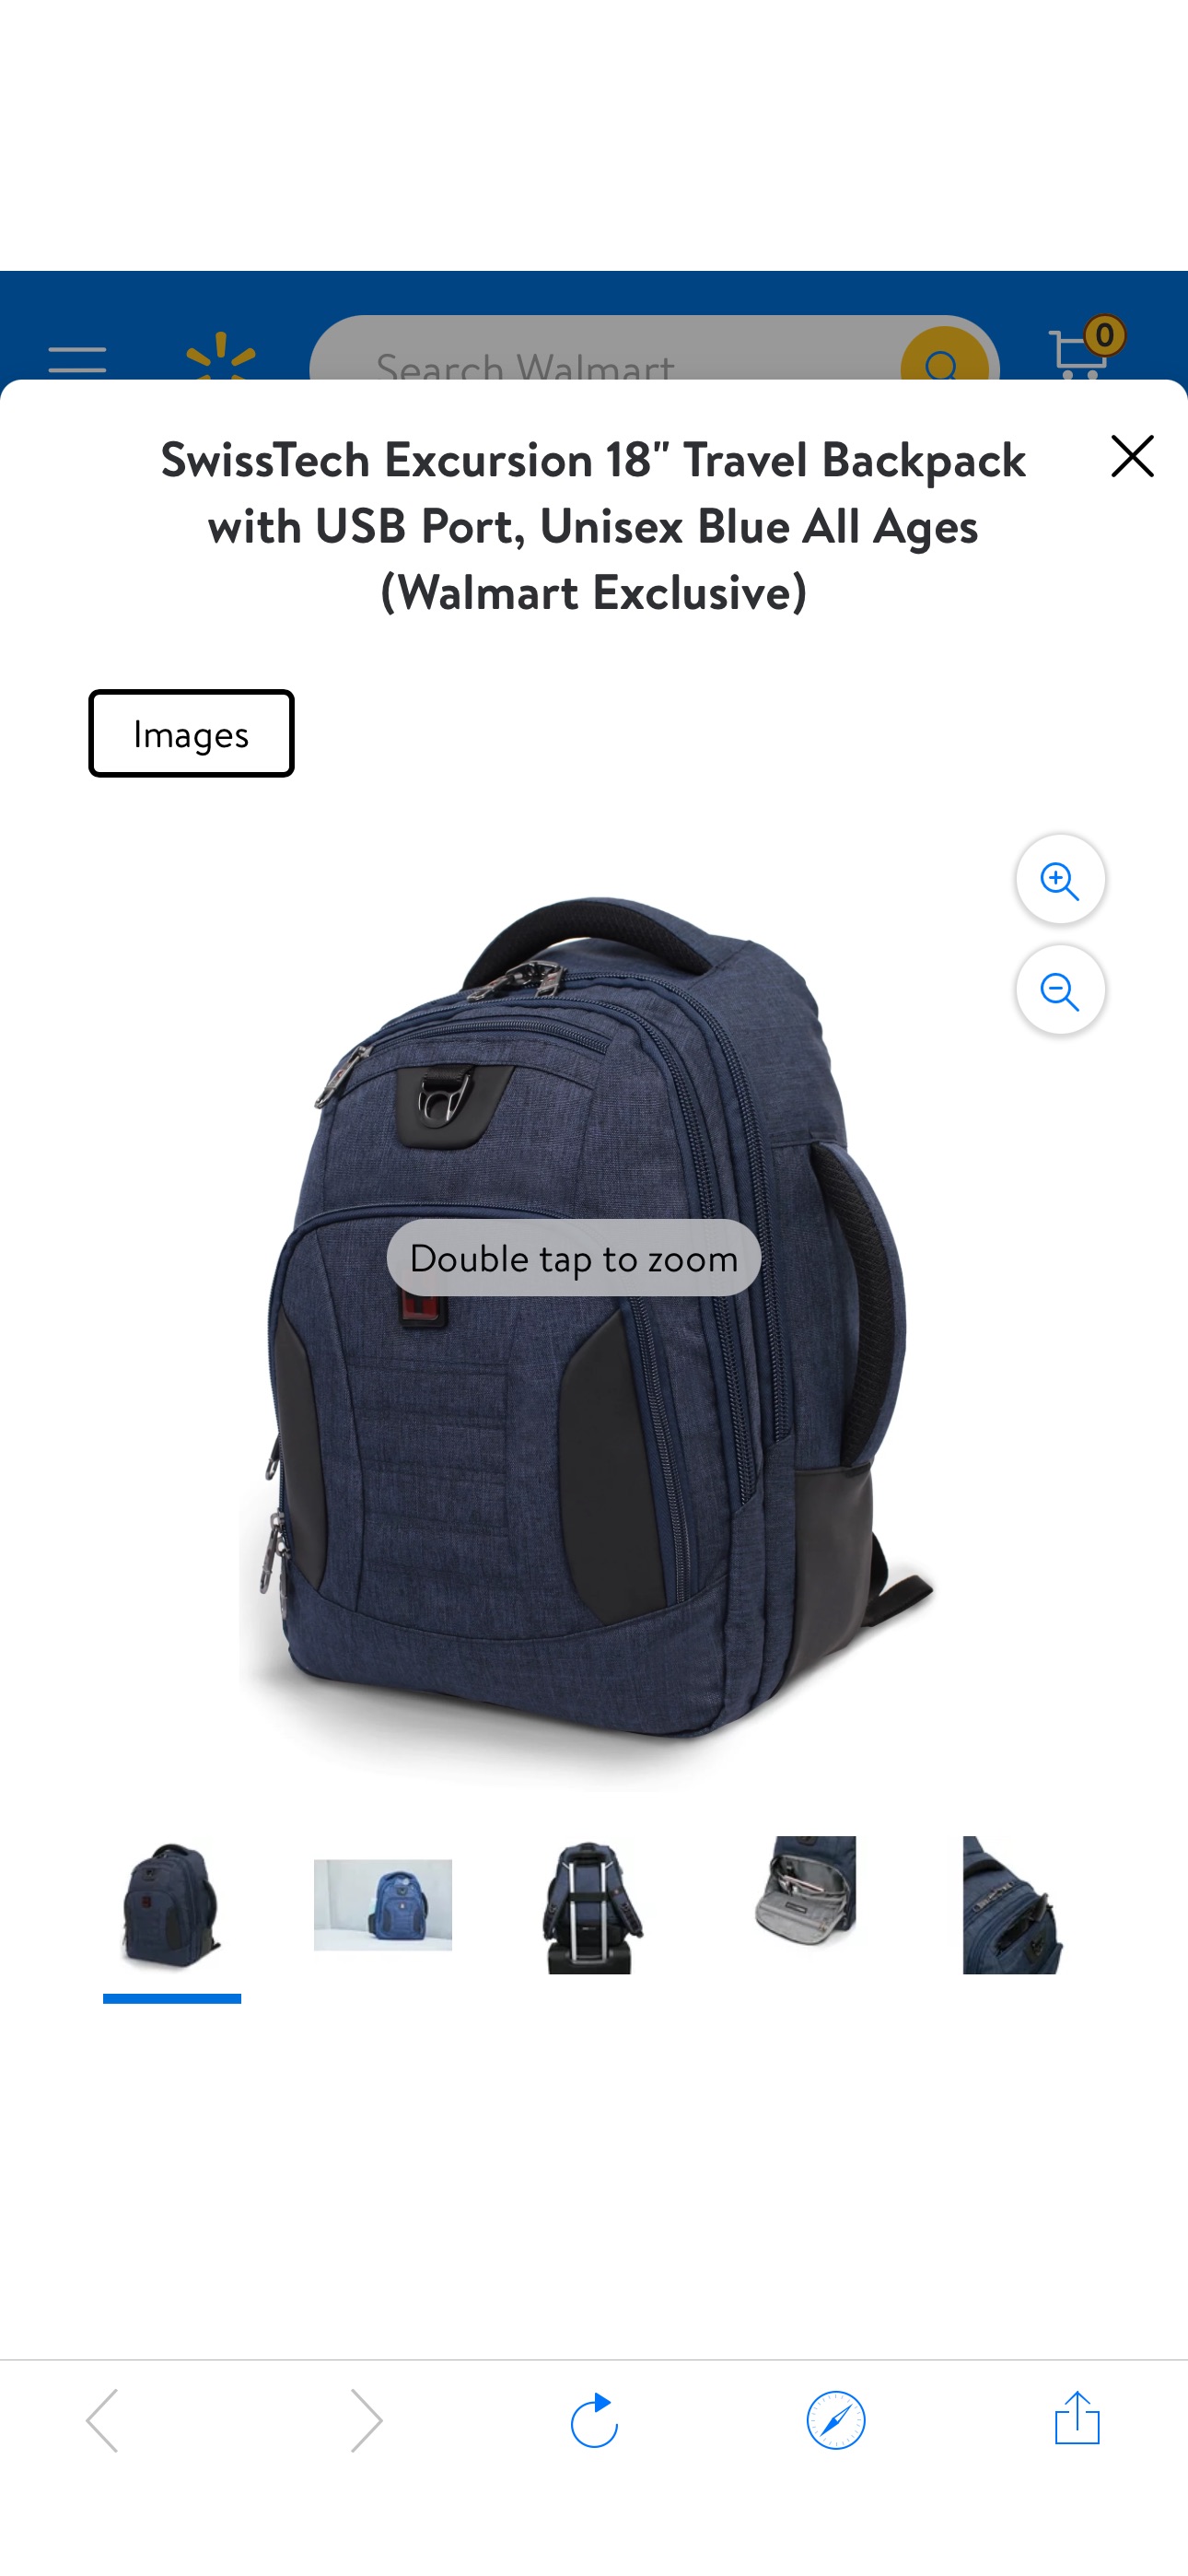 SwissTech Excursion 18" Travel Backpack with USB Port, Unisex Blue All Ages (Walmart Exclusive) - Walmart.com